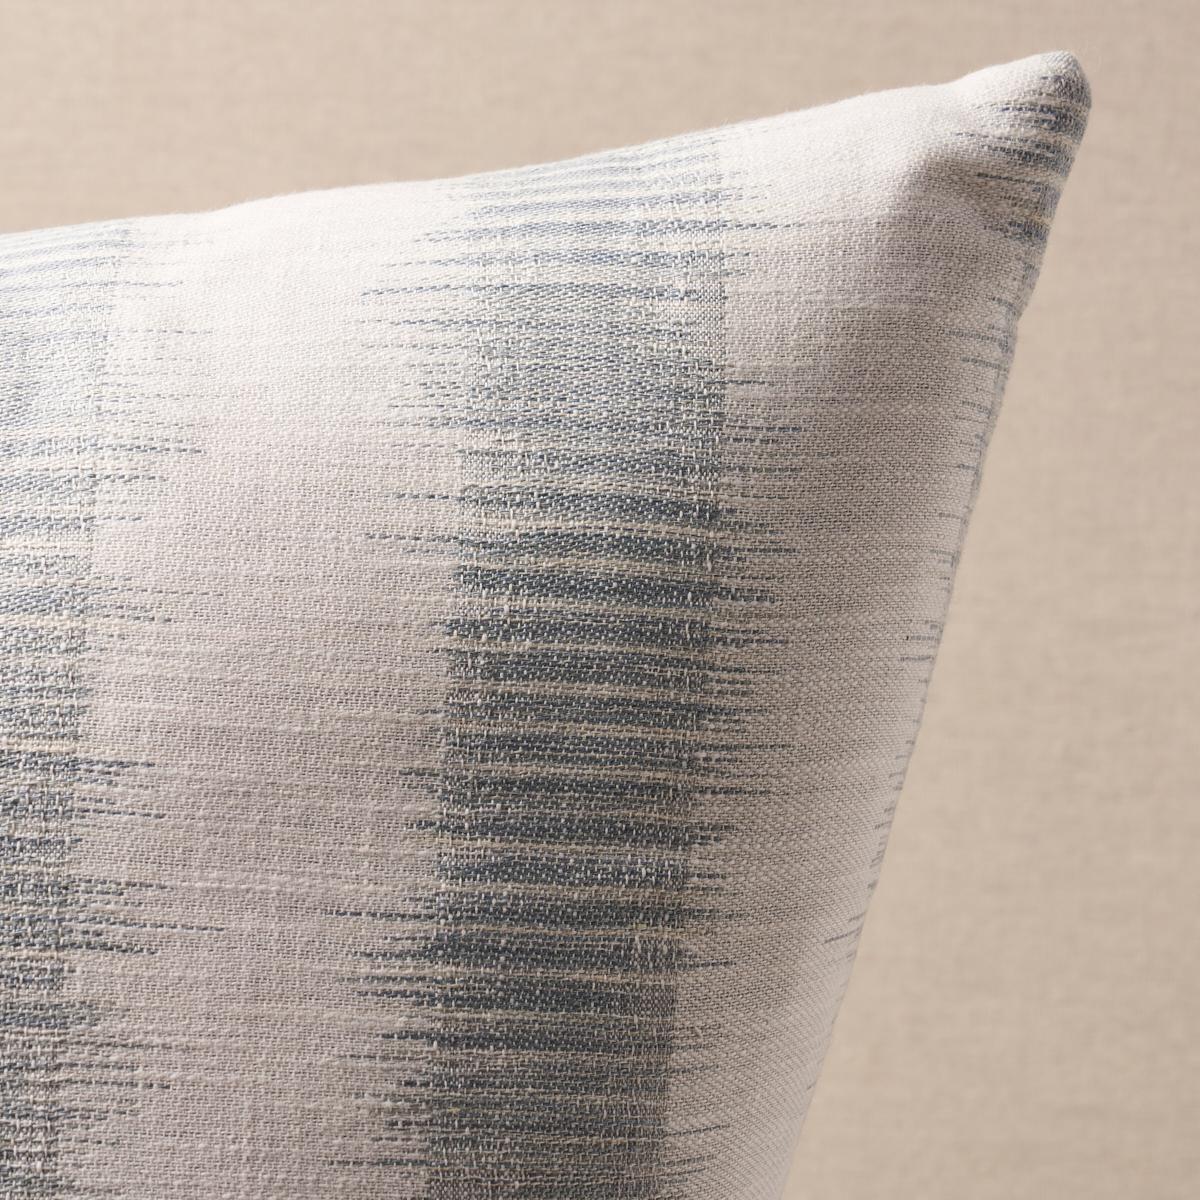 This pillow features Attleboro Ikat with a knife edge finish. Attleboro Ikat is a woven, irregular stripe made of twisted cotton and linen yarns. Pillow includes a feather/down fill insert and hidden zip closure.
   